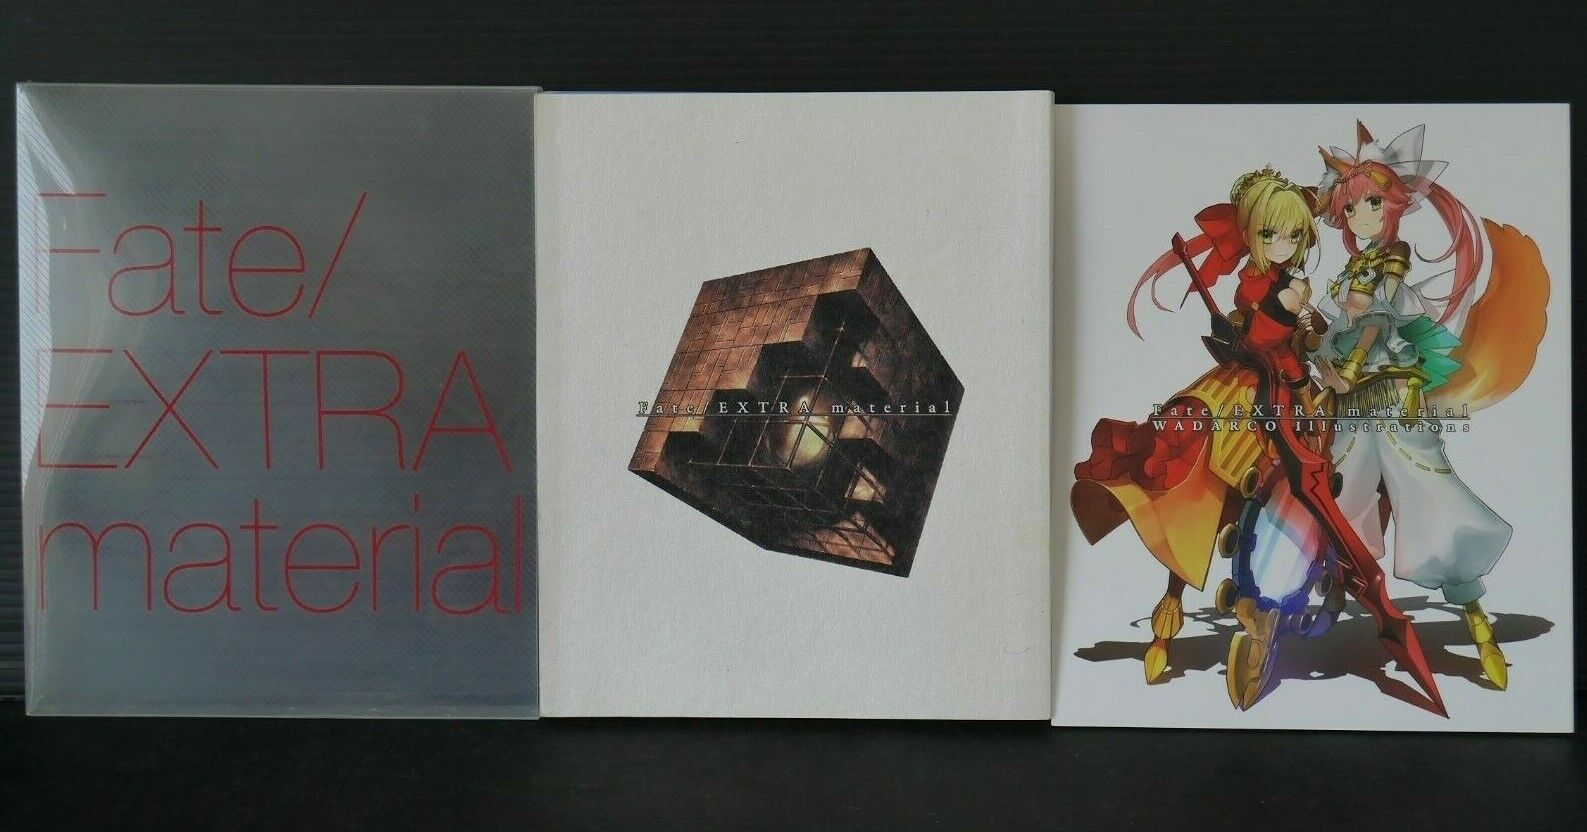 JAPAN Fate/Extra Material First Limit Edition Book (Illust: wadarco etc.)